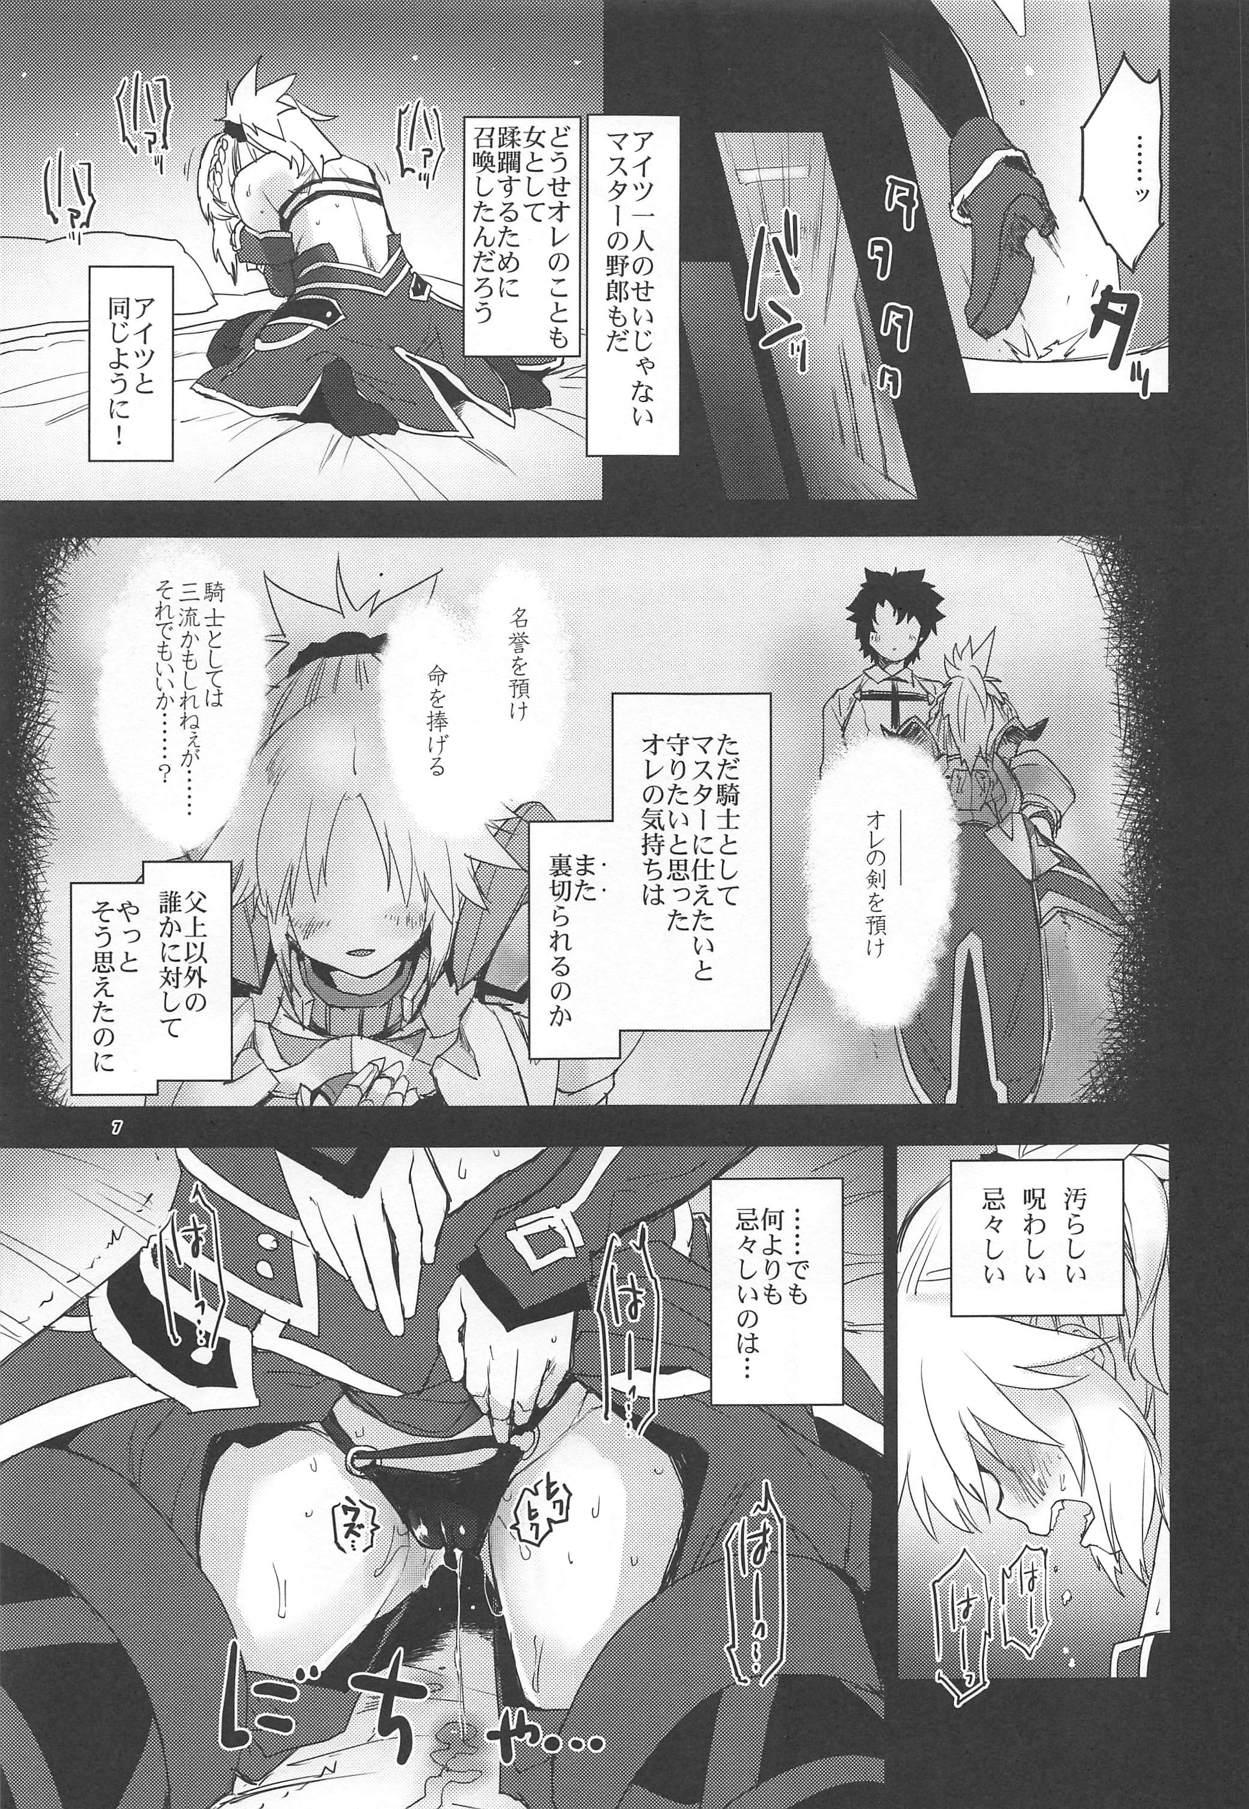 France With My Honey Knight - Fate grand order Kink - Page 6